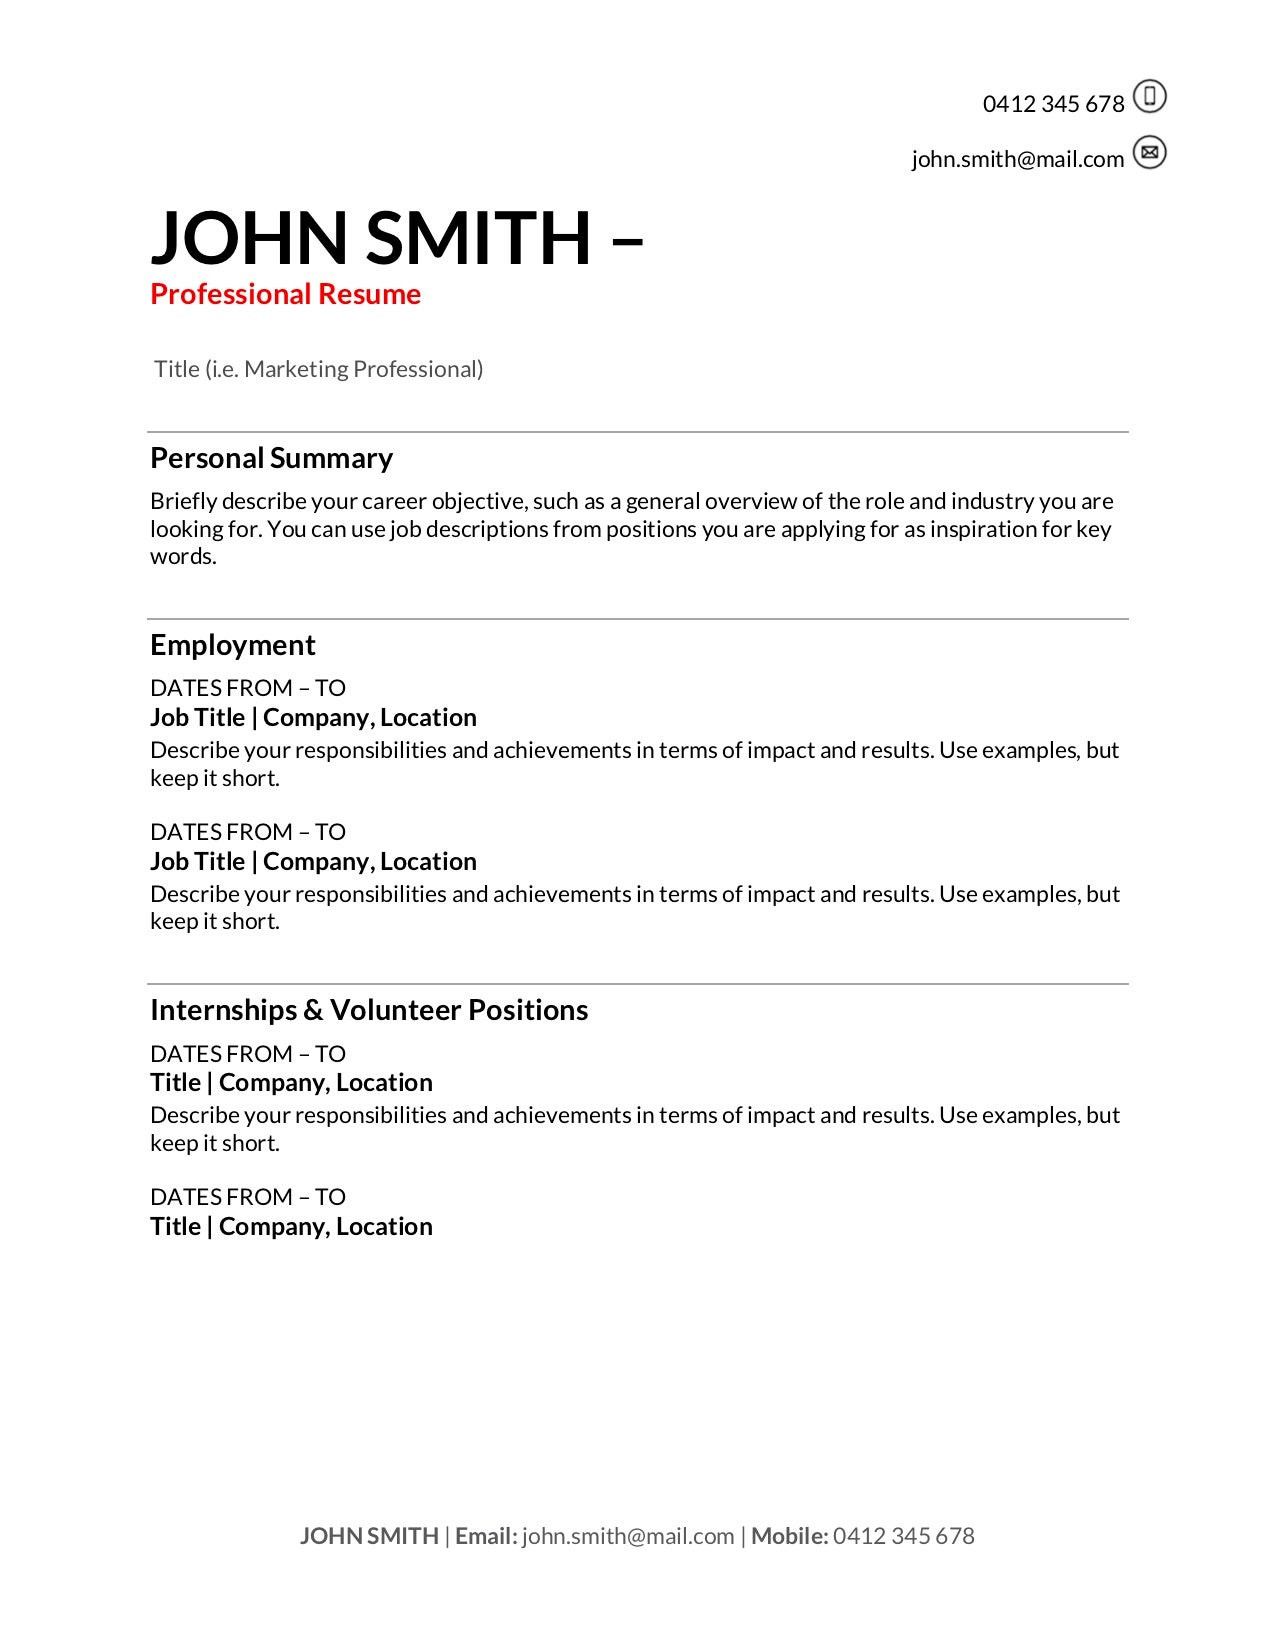 Sample Resume for Job Application In Australia Free Resume Templates [download]: How to Write A Resume In 2022 …